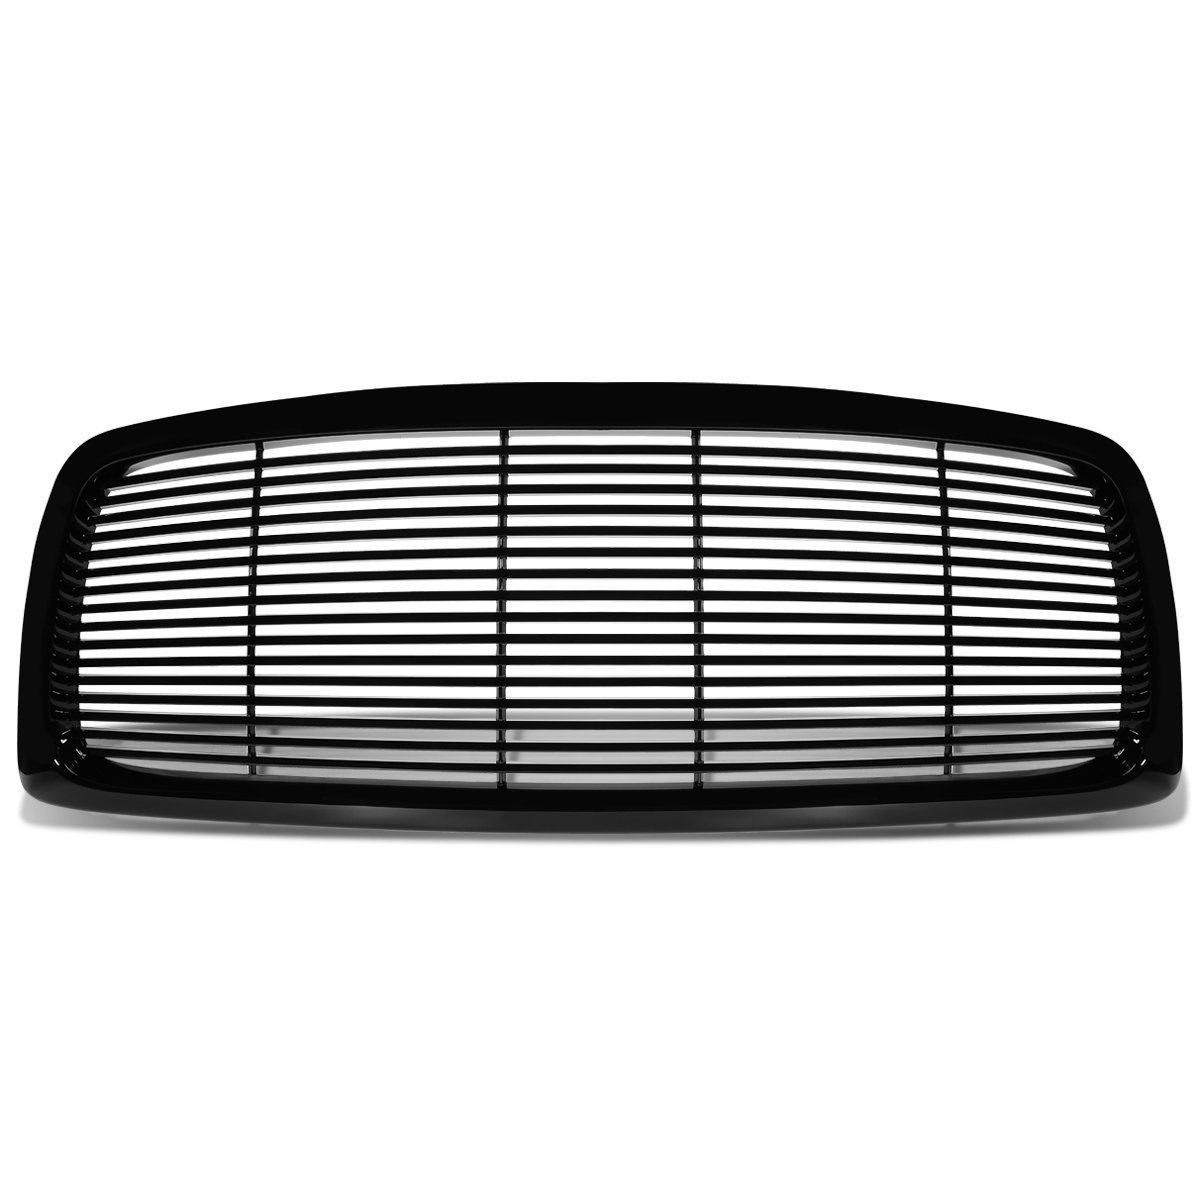 Dodge Ram 1500/2500/3500 ABS Plastic Glossy Horizontal Grille